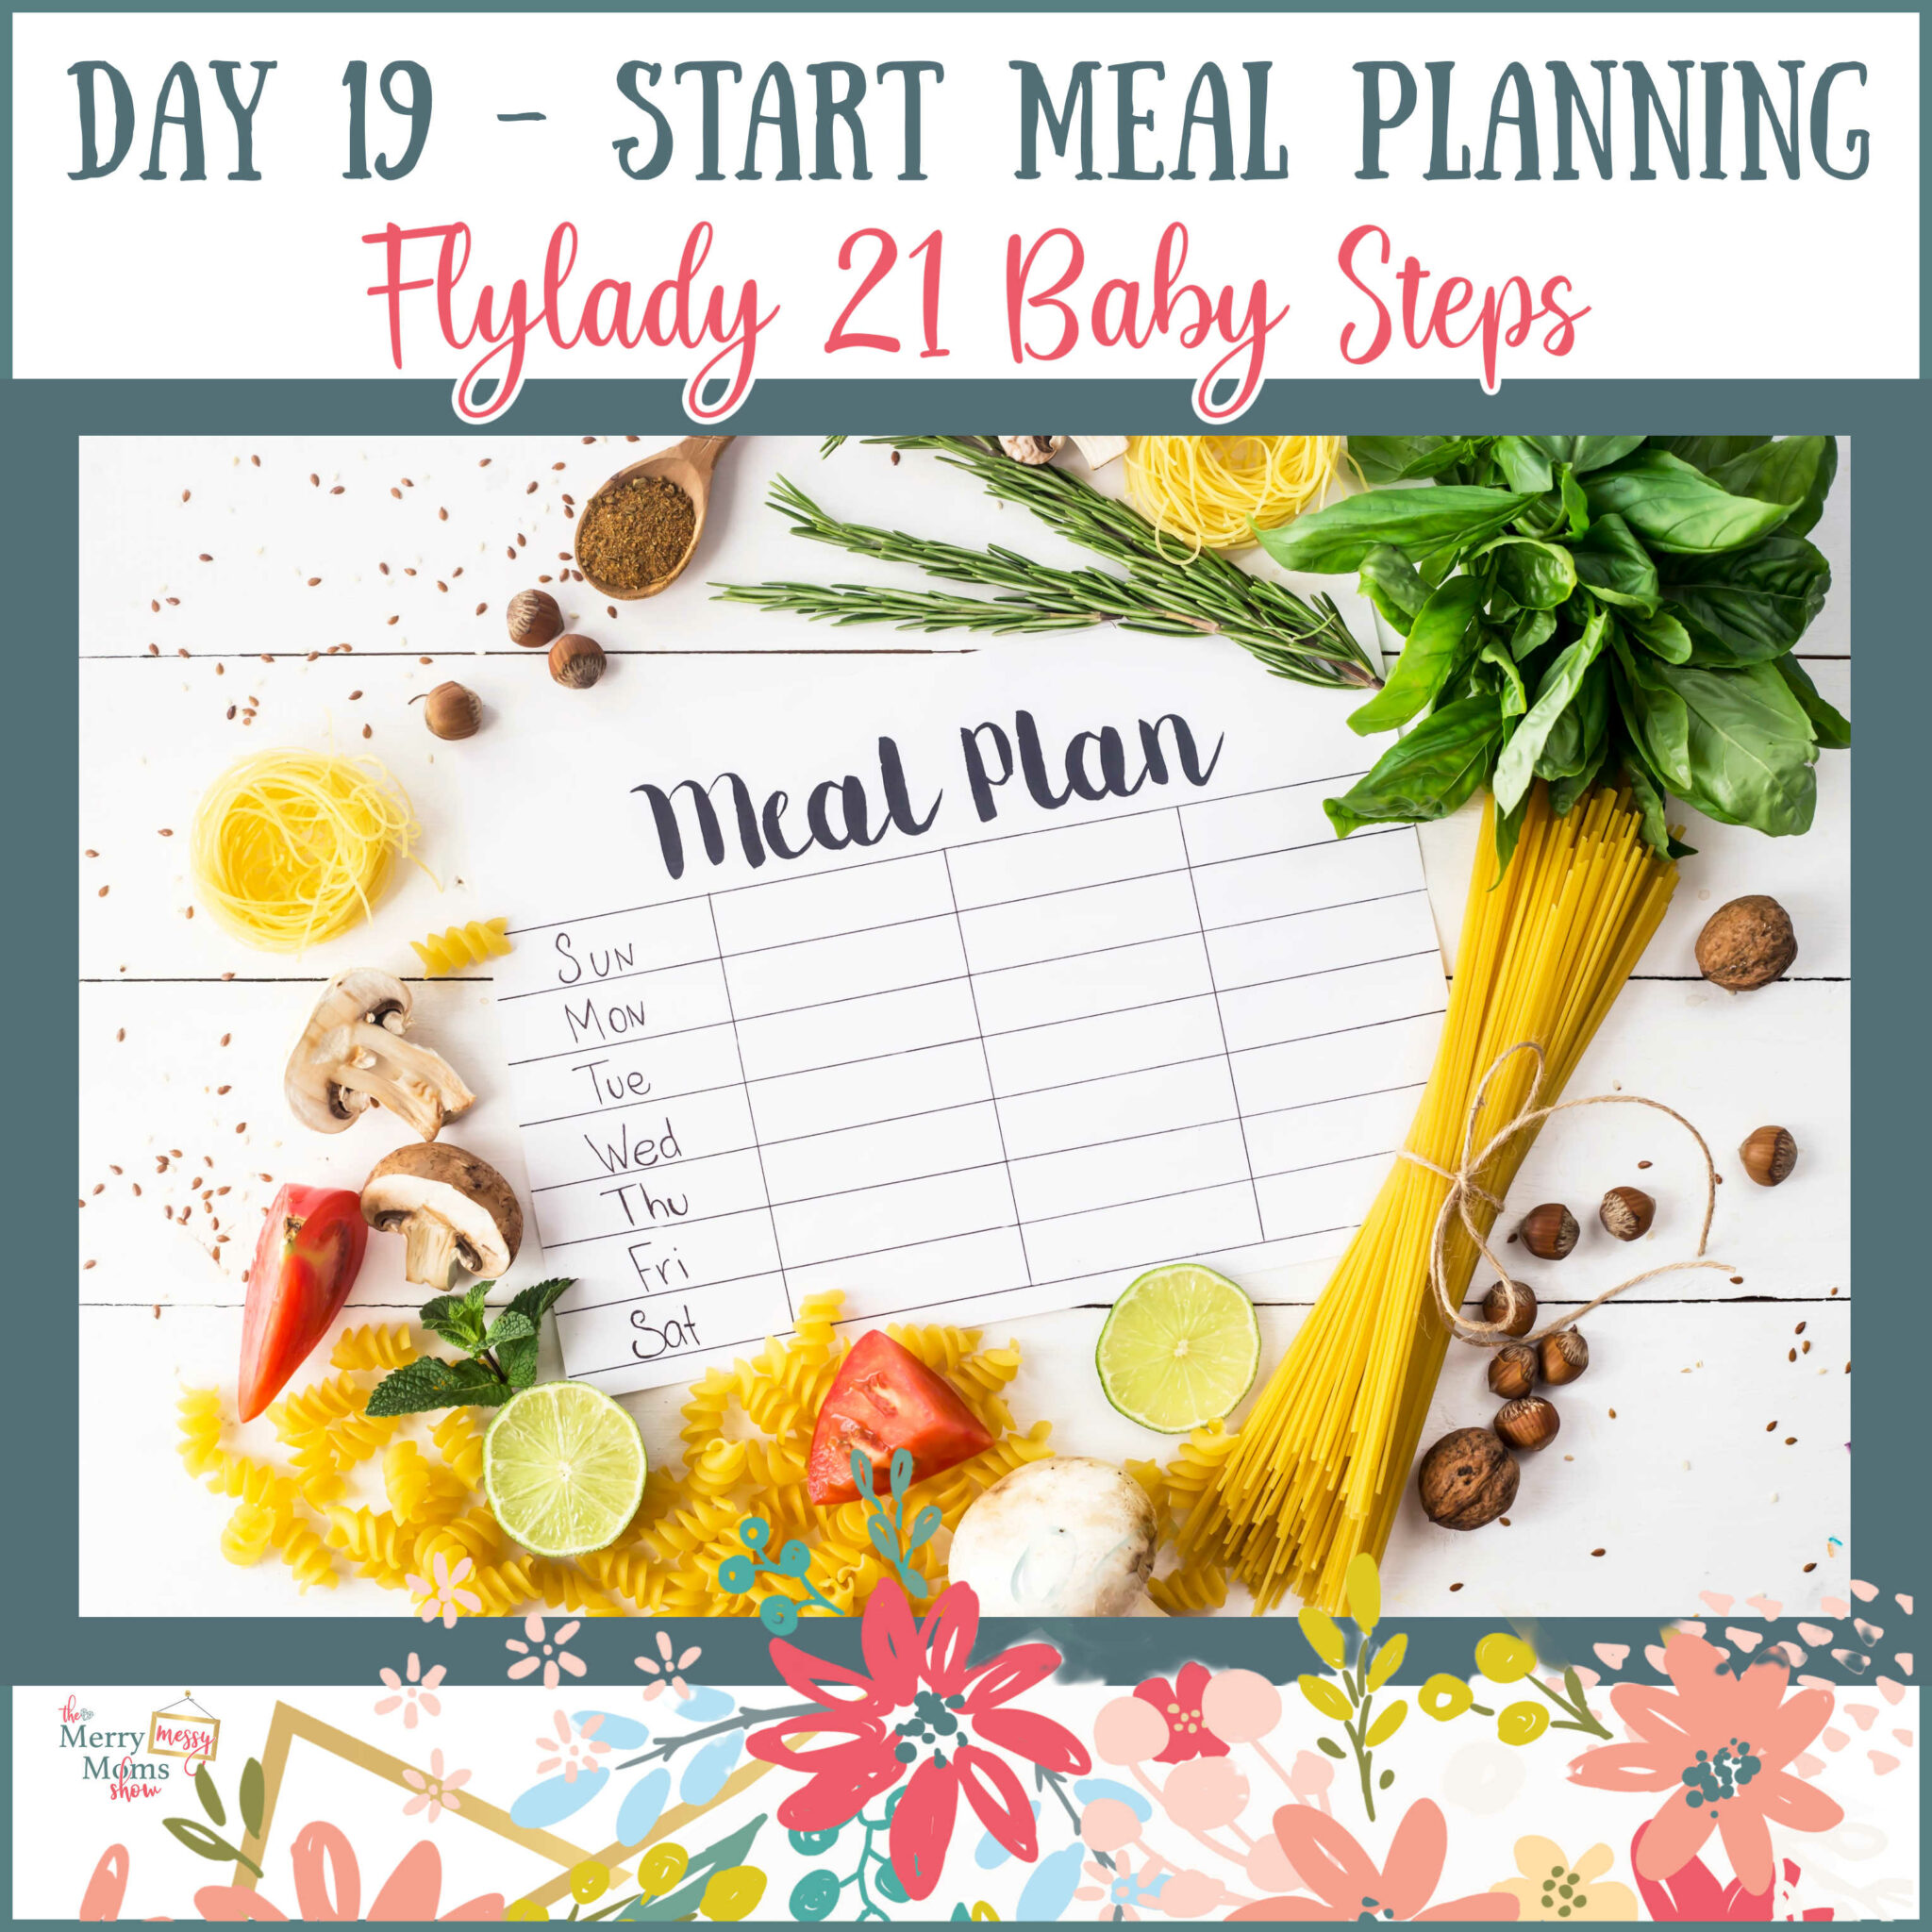 Flylady Baby Steps - Day 19 - Start Meal Planning